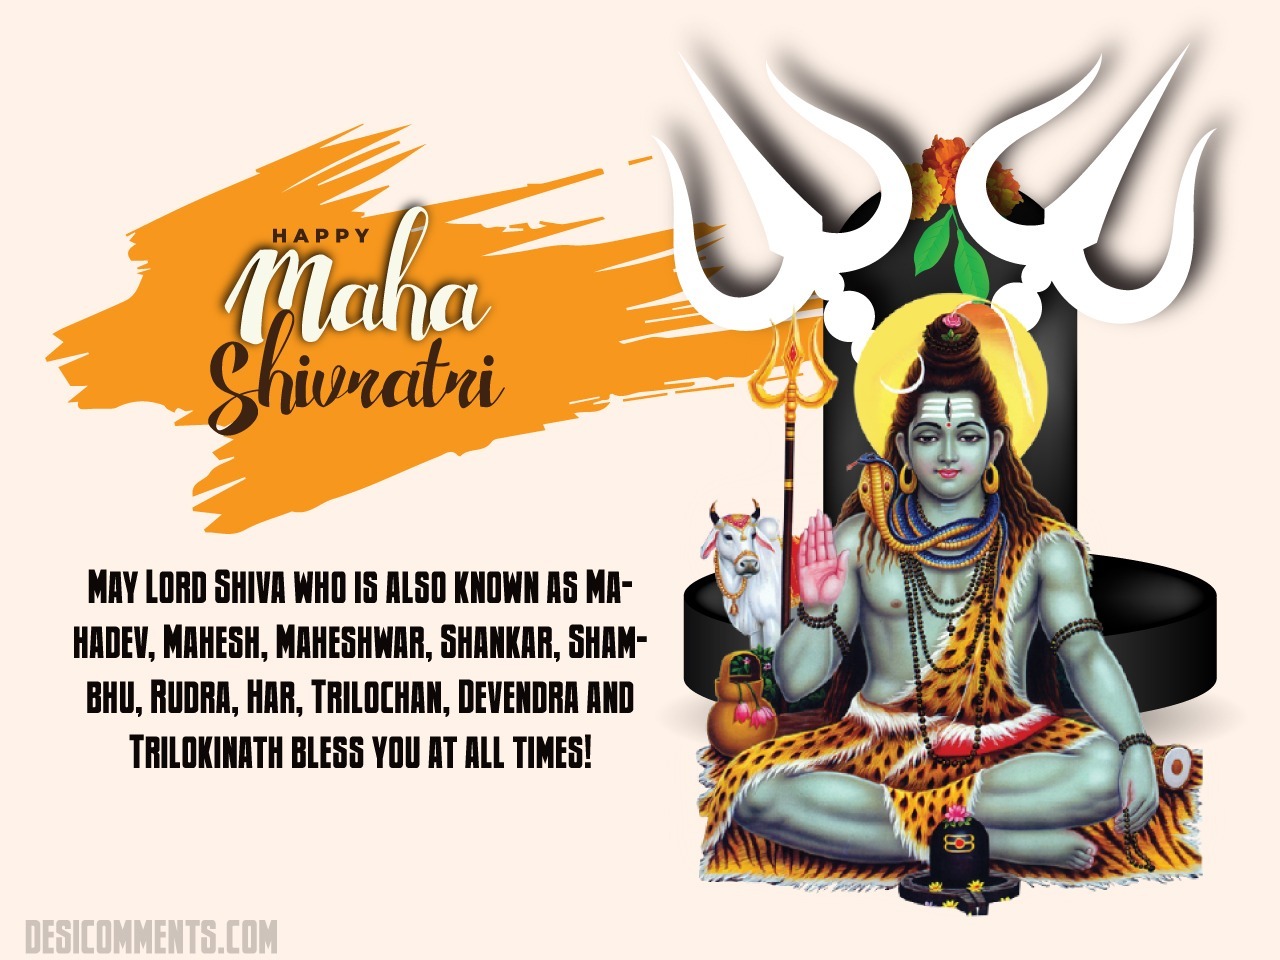 200+ Maha Shivaratri Images, Pictures, Photos - Page 2